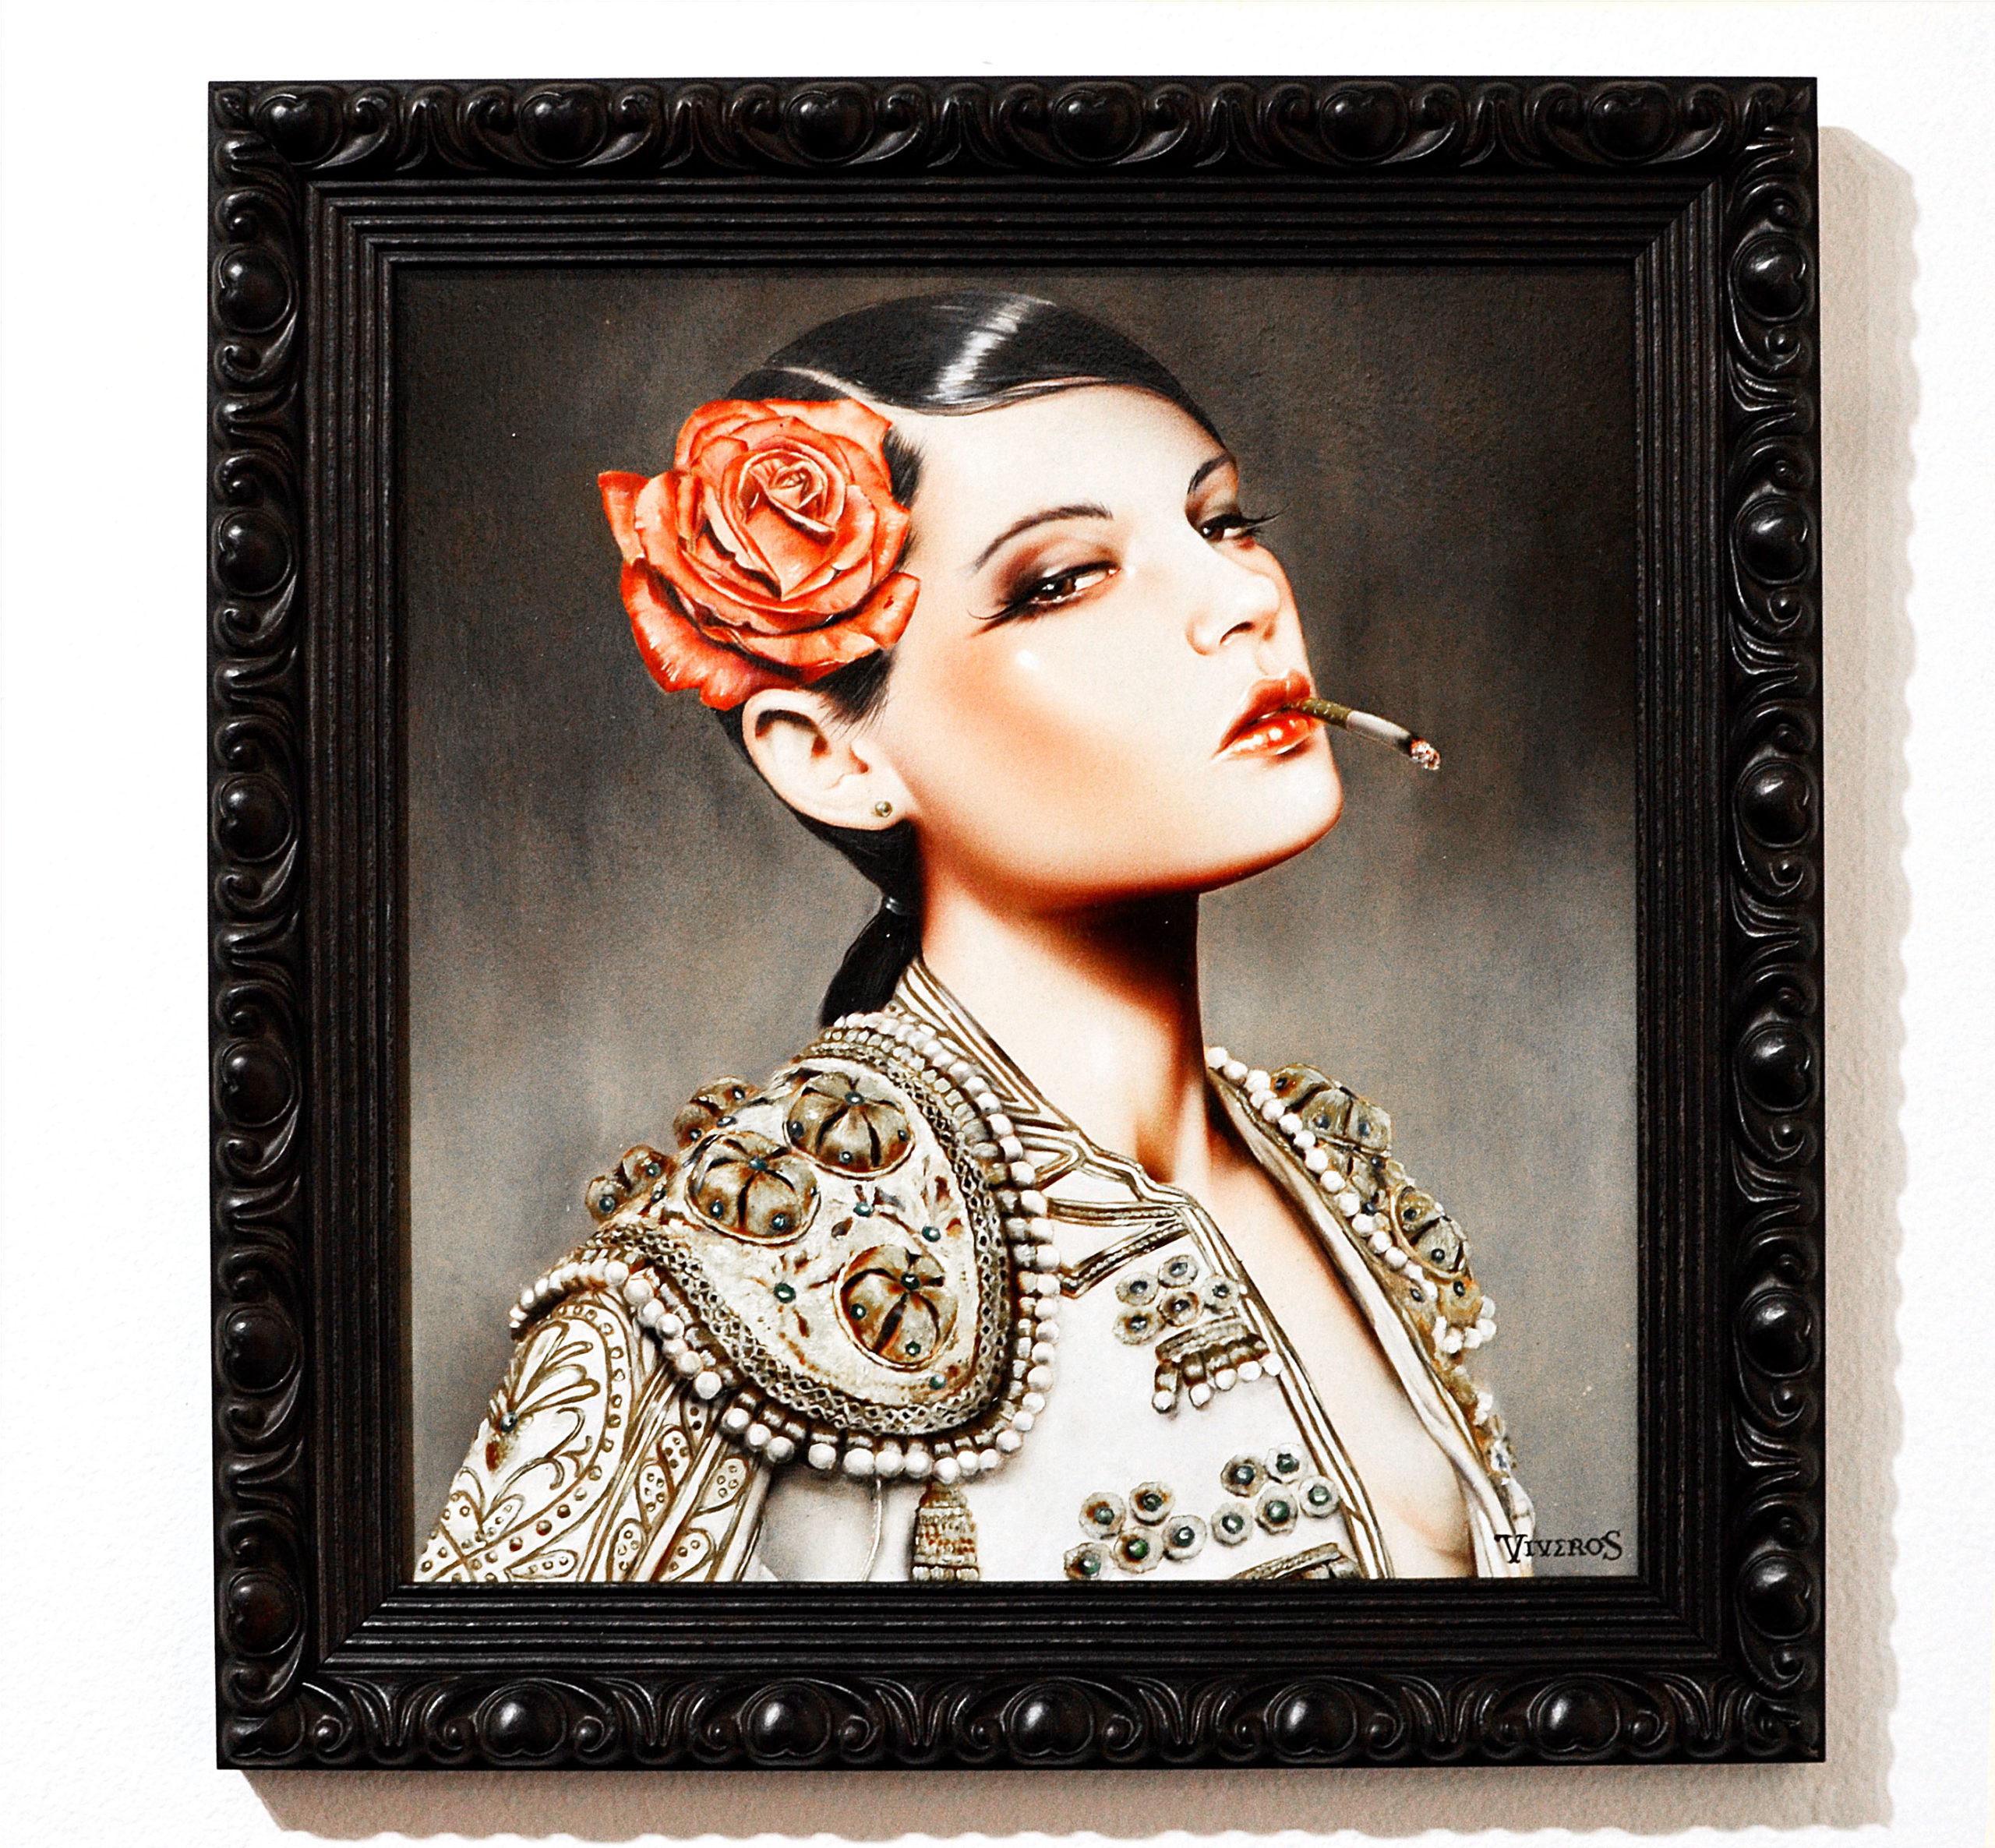 The powerful women of Brian M. Viveros